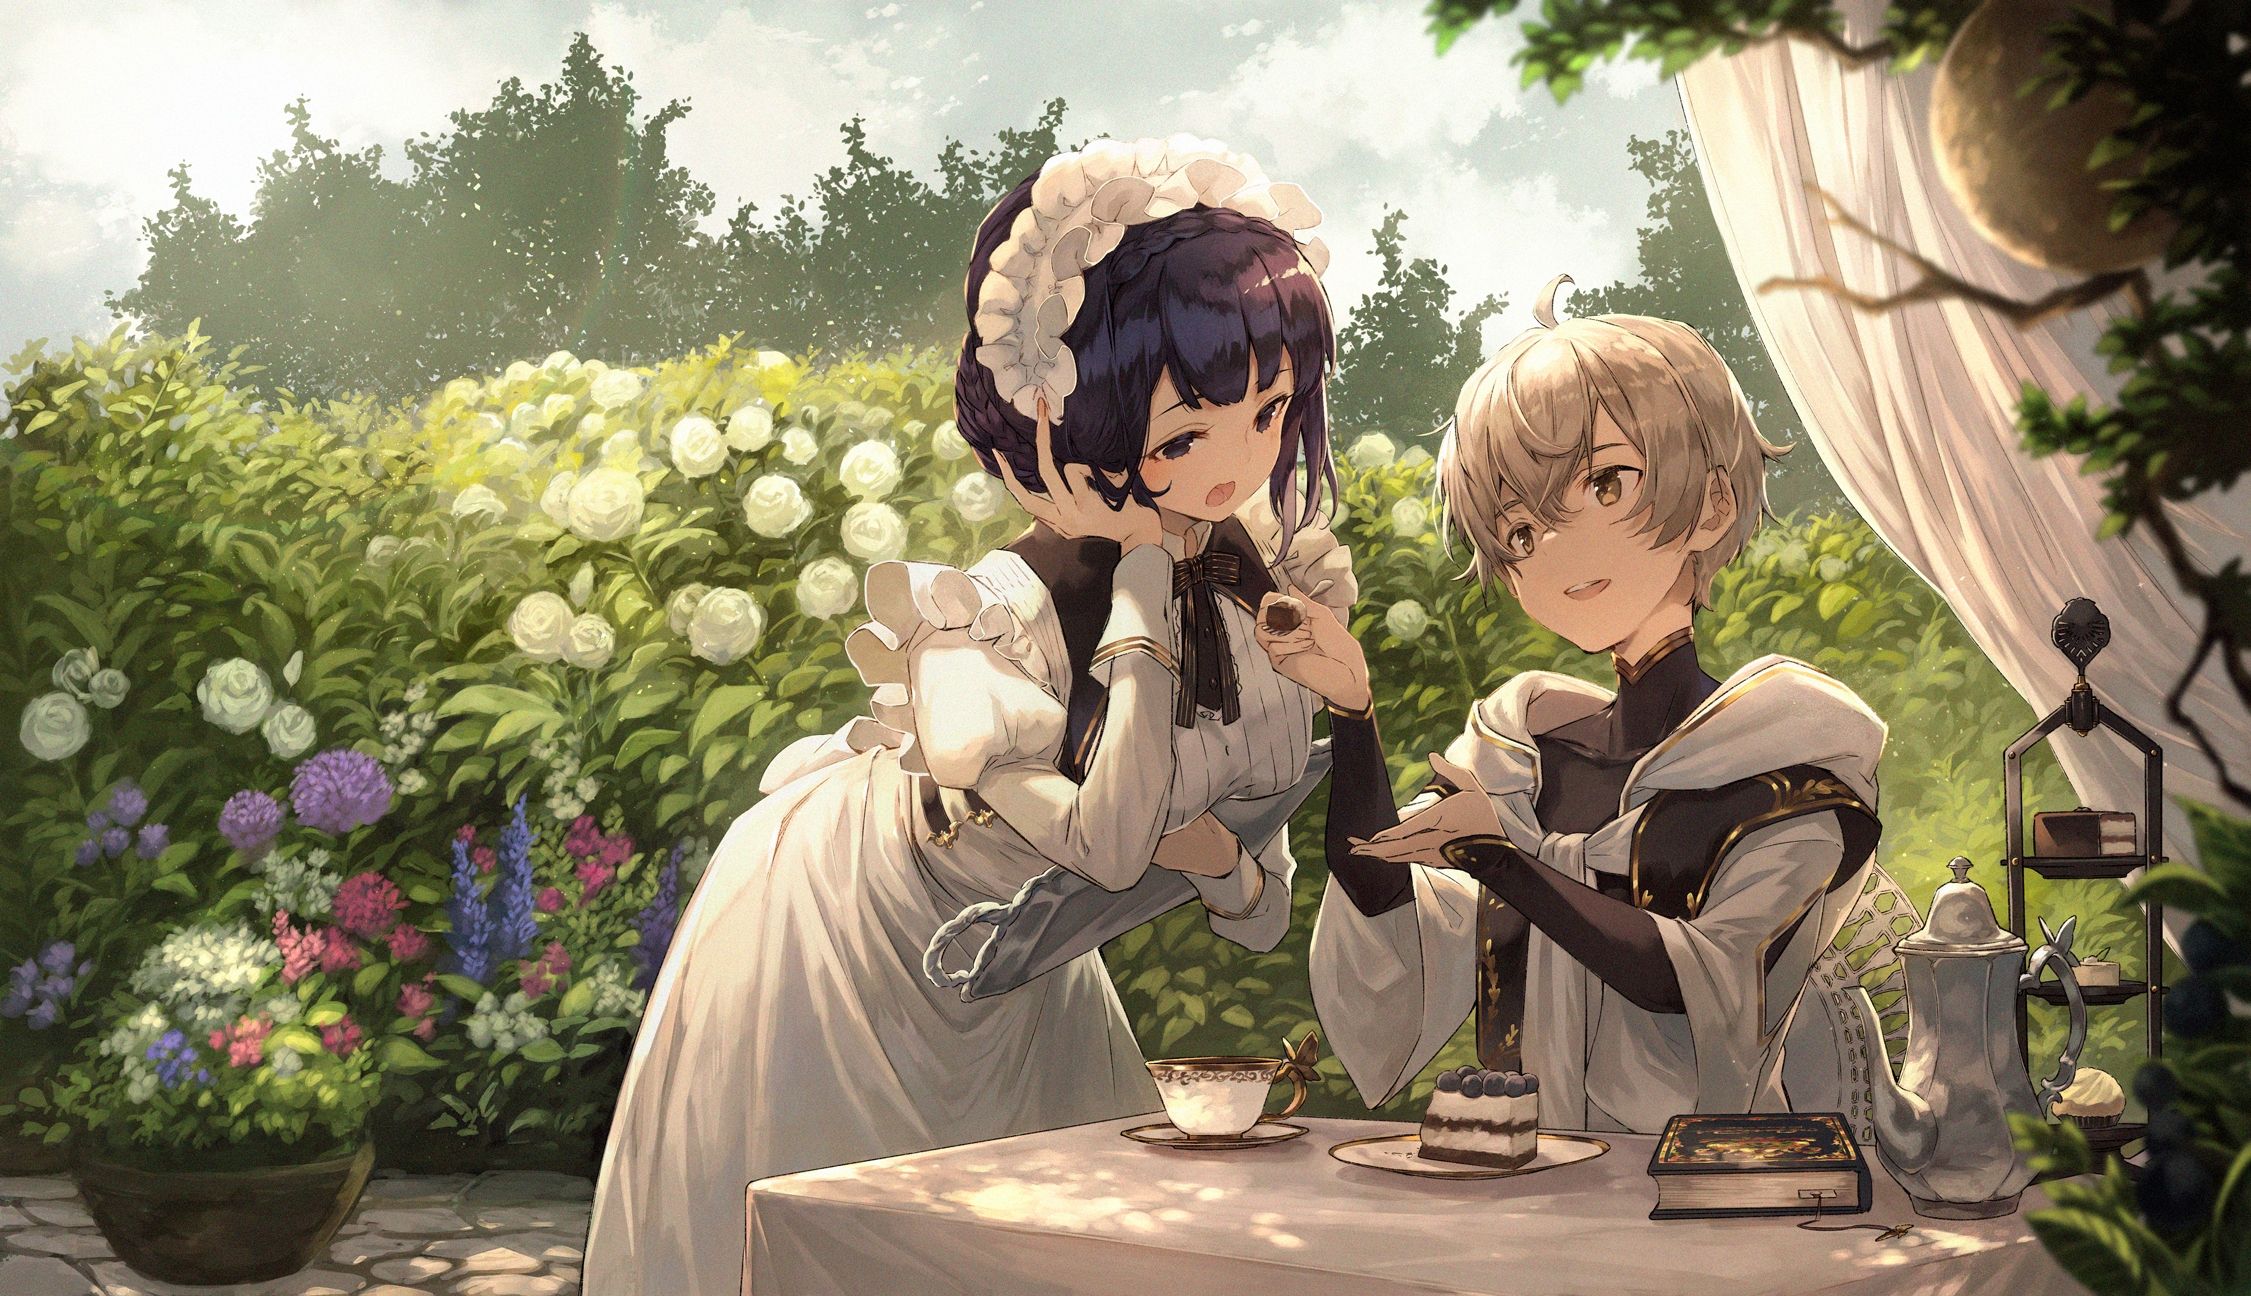 Download 2251x1296 Anime Boy And Maid, Cute, Desert, Romantic, Maid Outfit, Cake Wallpaper